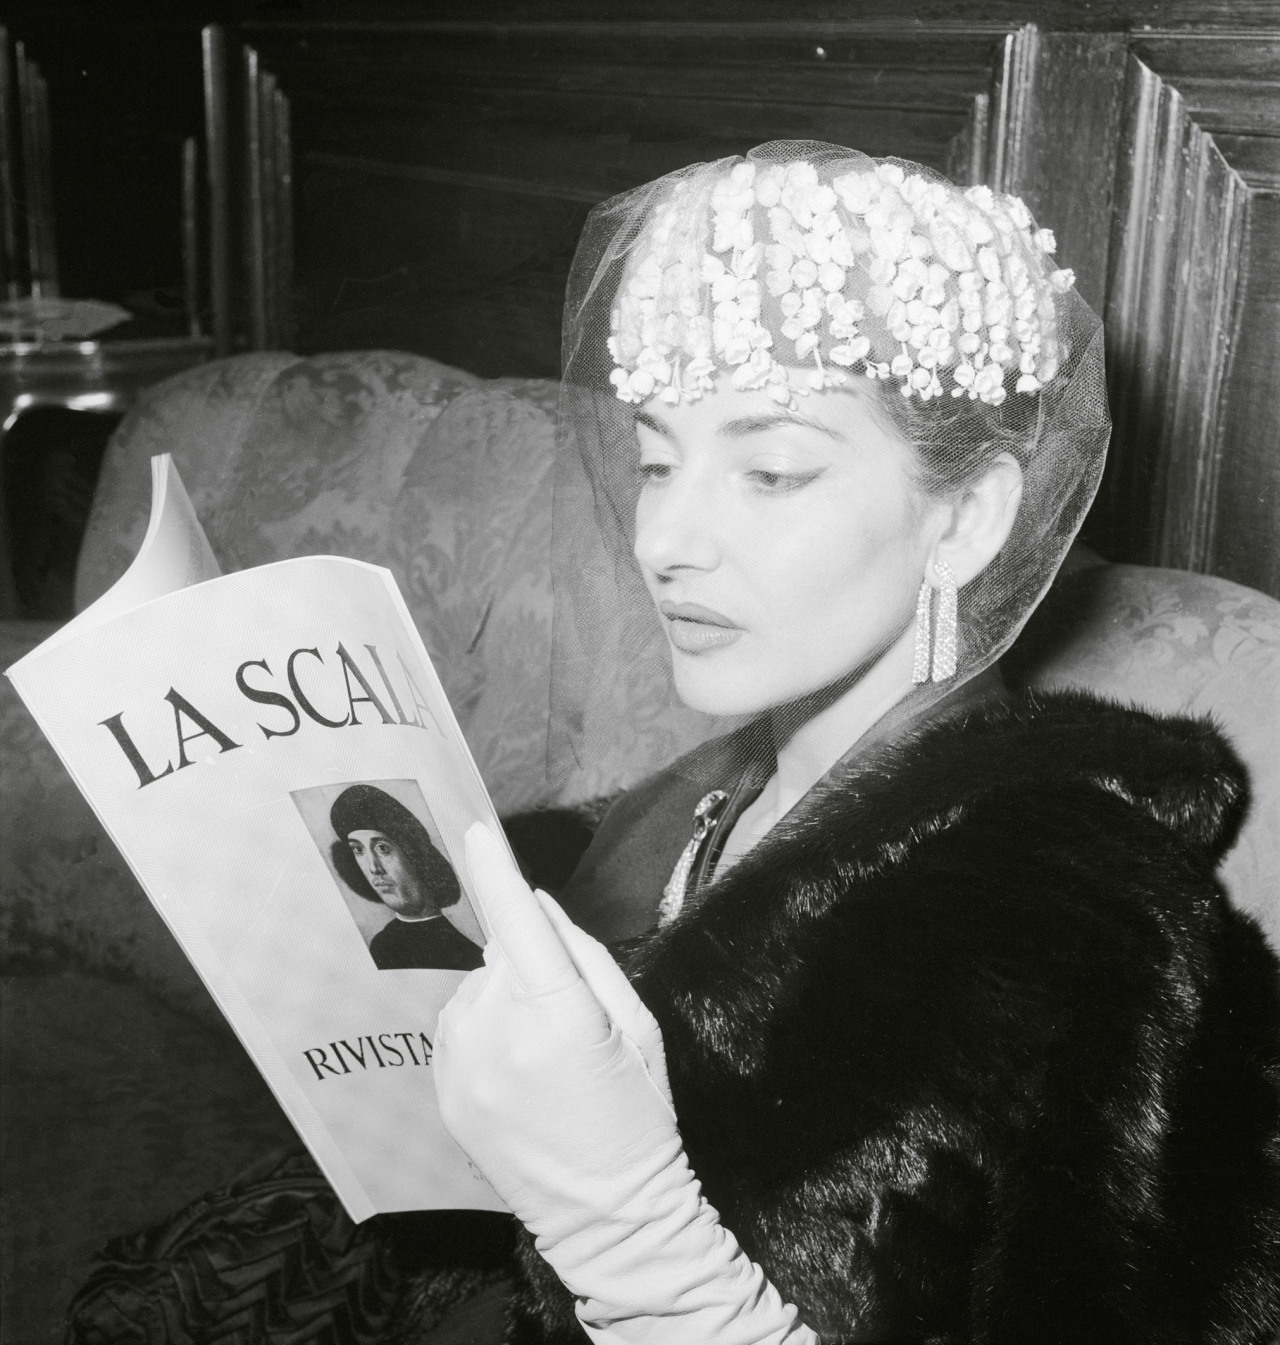 Maria Callas reads La Scala.
“An opera begins long before the curtain goes up and ends long after it has come down. It starts in my imagination, it becomes my life, and it stays part of my life long after I’ve left the opera house.” – Maria Callas